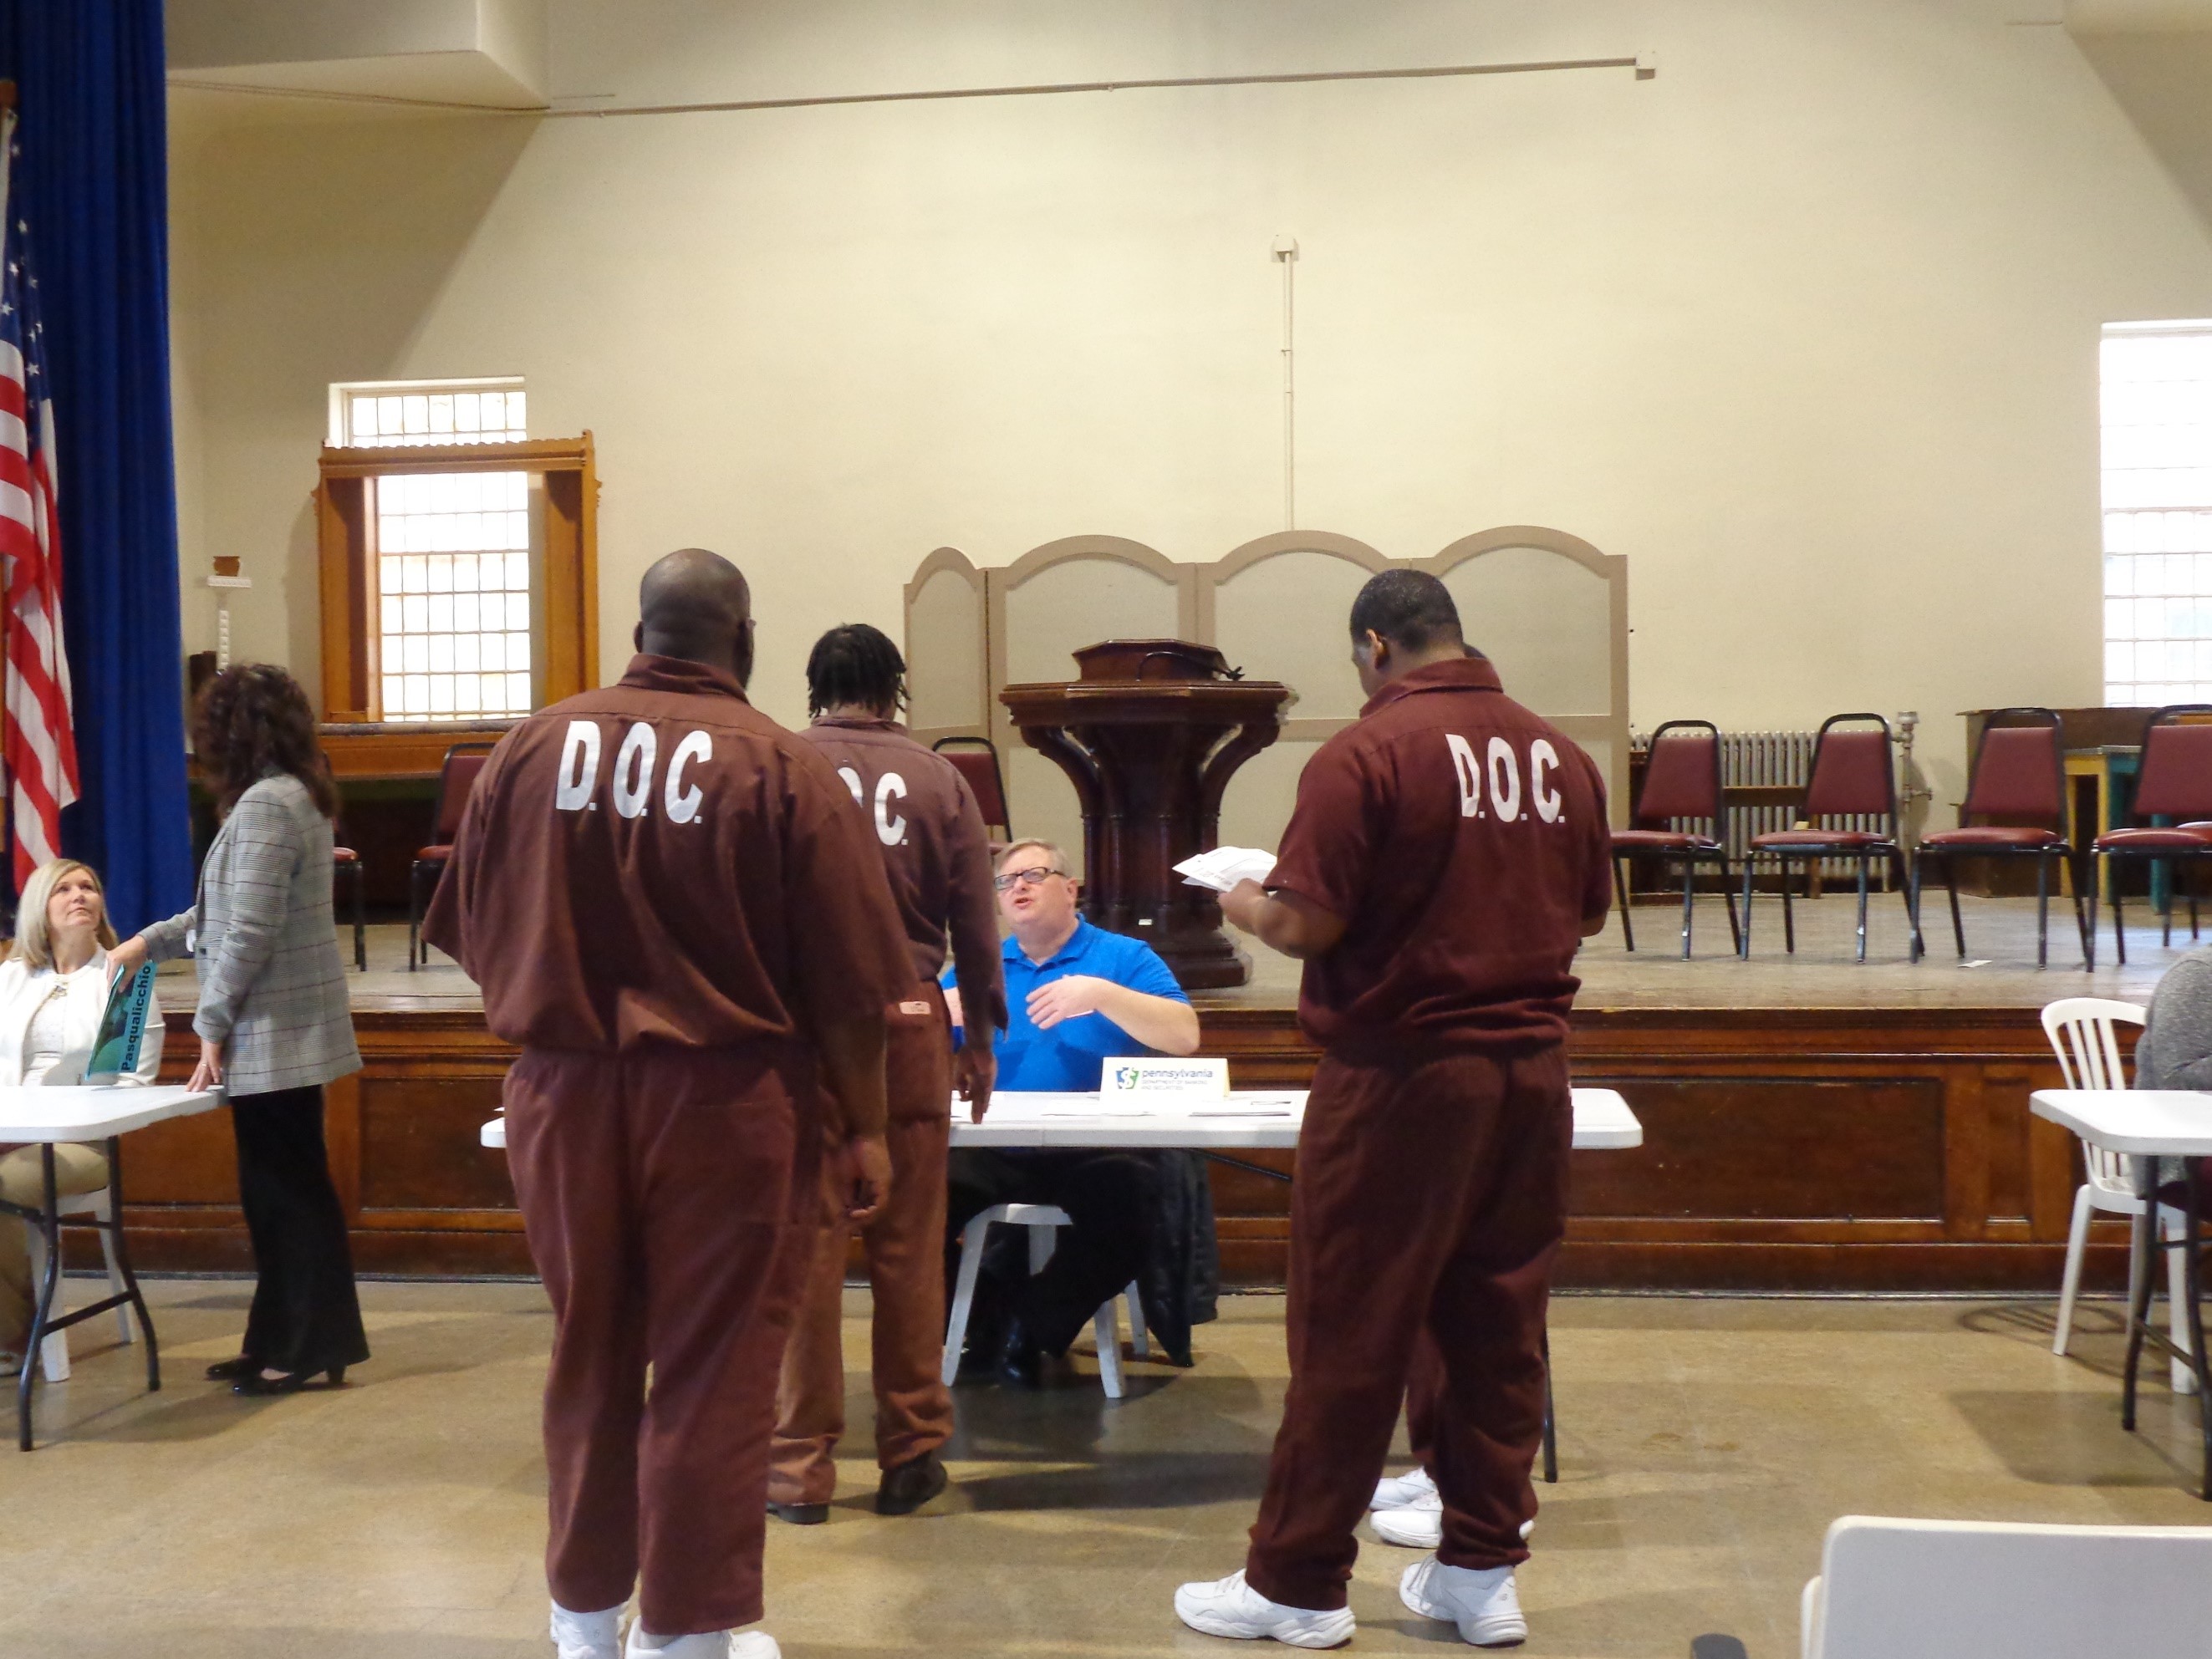 WAM - 2019 March 27 Career and Reentry Fair - inmates at table talking to man in blue shirt.jpg